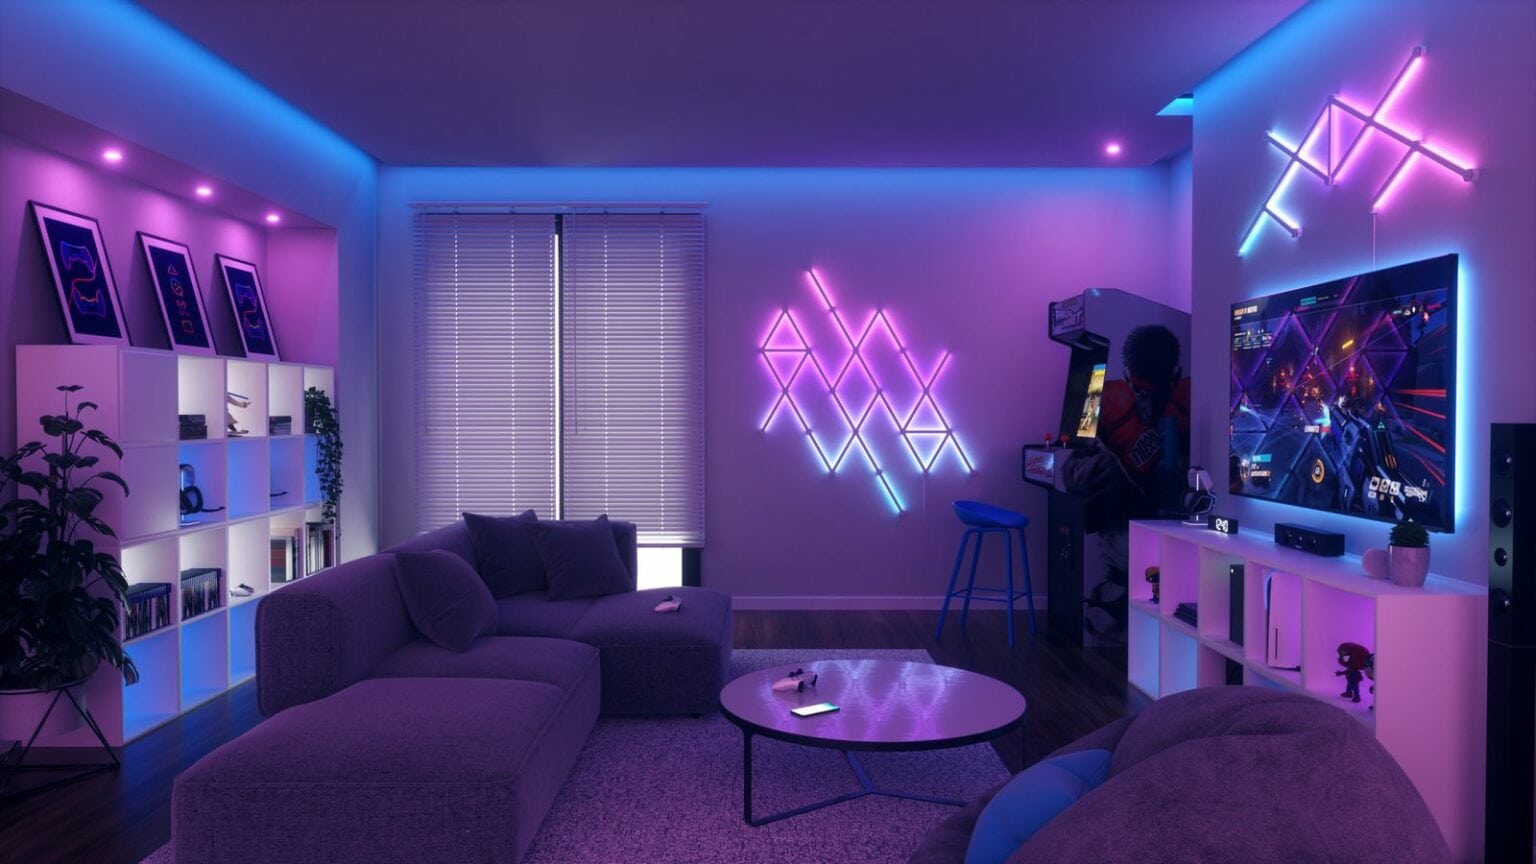 Nanoleaf's groovy mood lighting products will soon be Thread border routers for HomeKit devices.